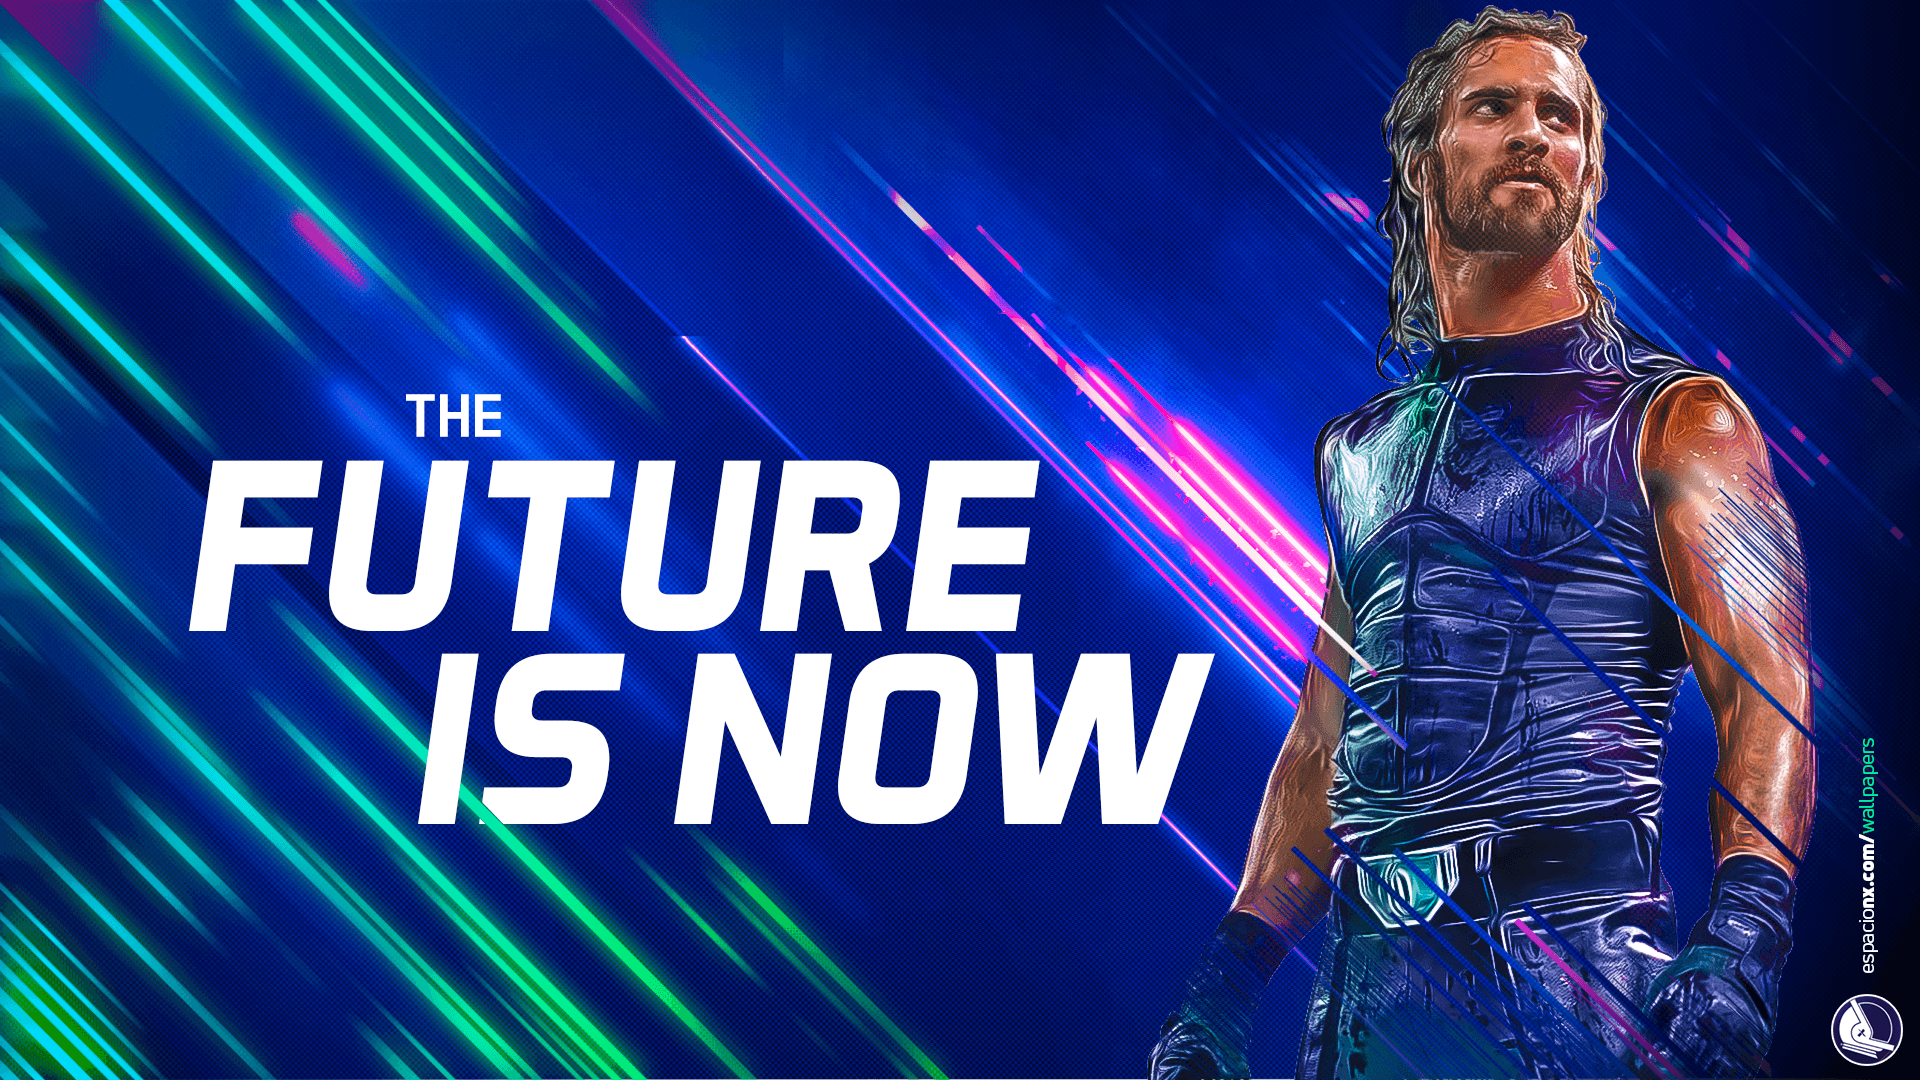 The “Future is Now” Wallpaper